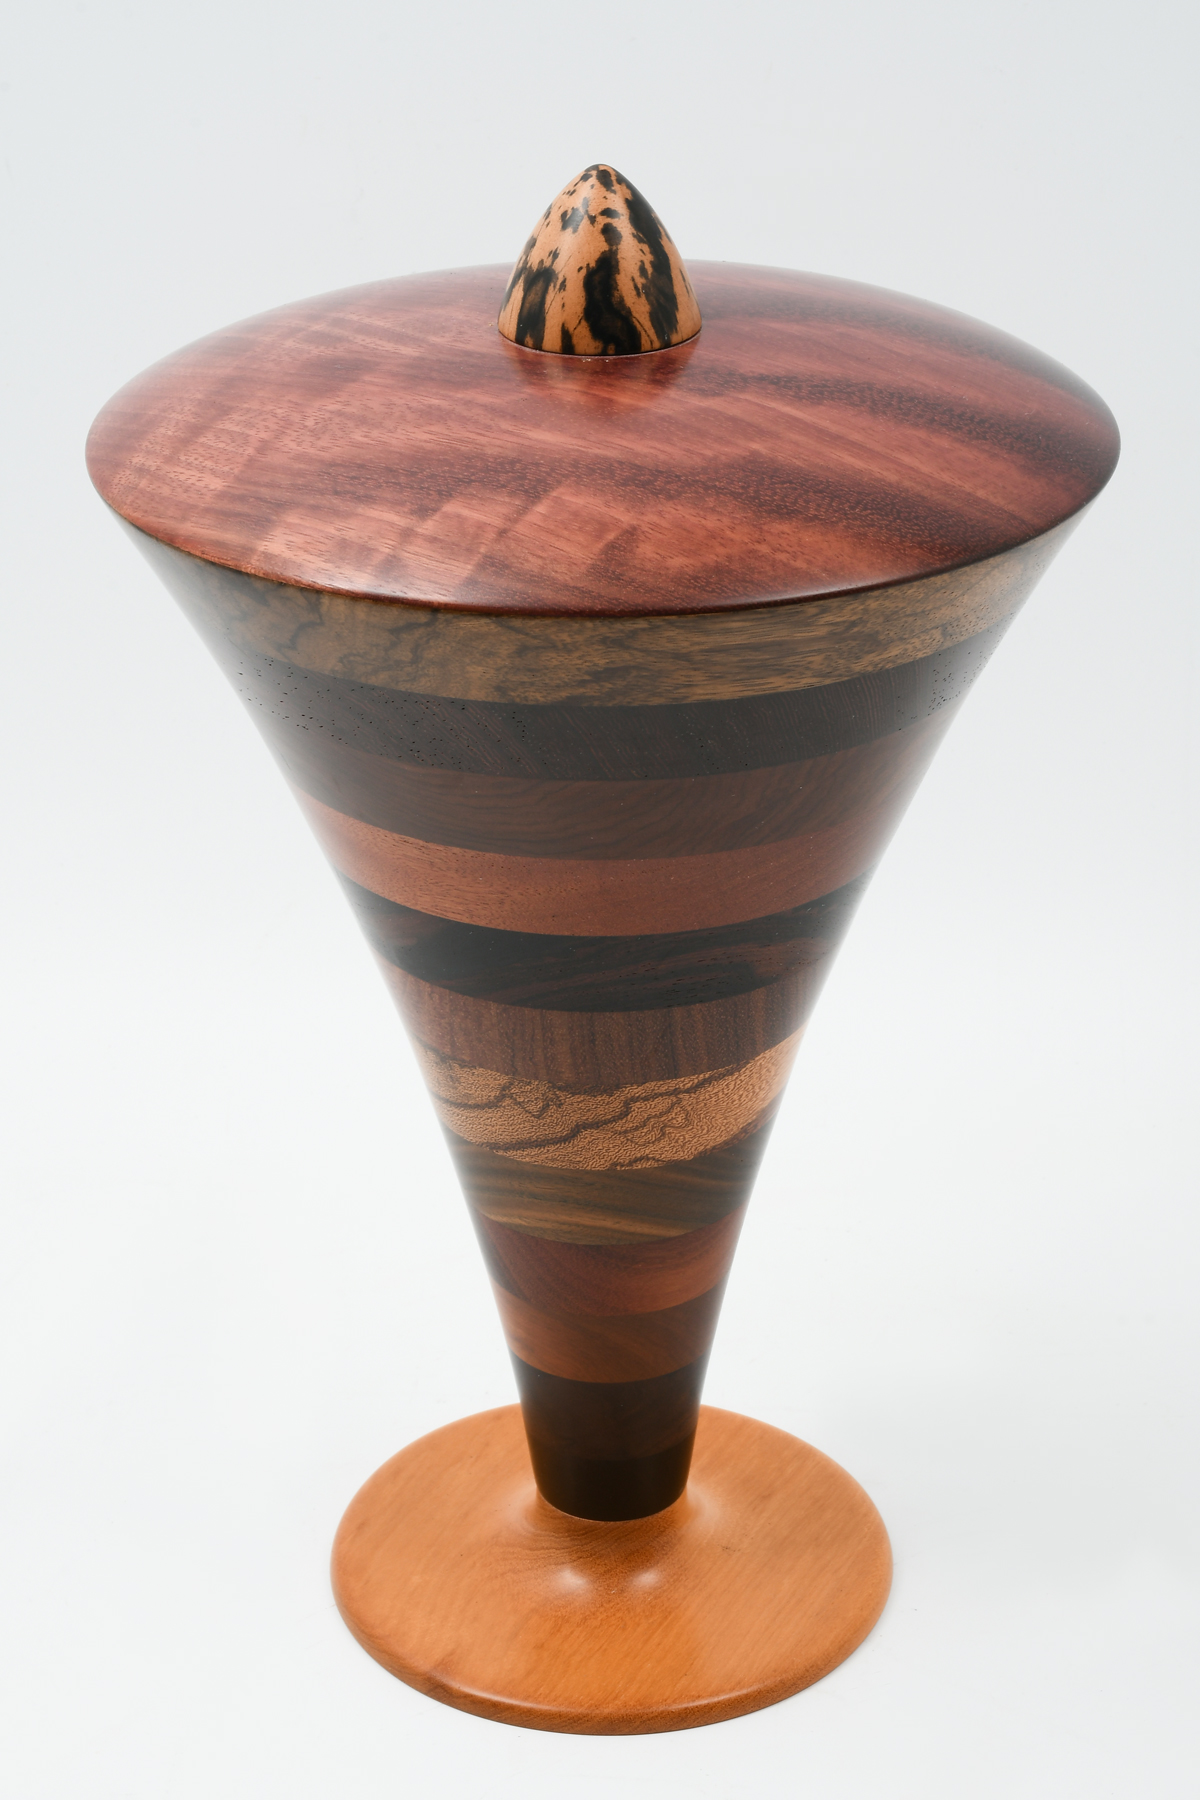 L CHENEY MIXED EXOTIC TURNED WOOD 27606d